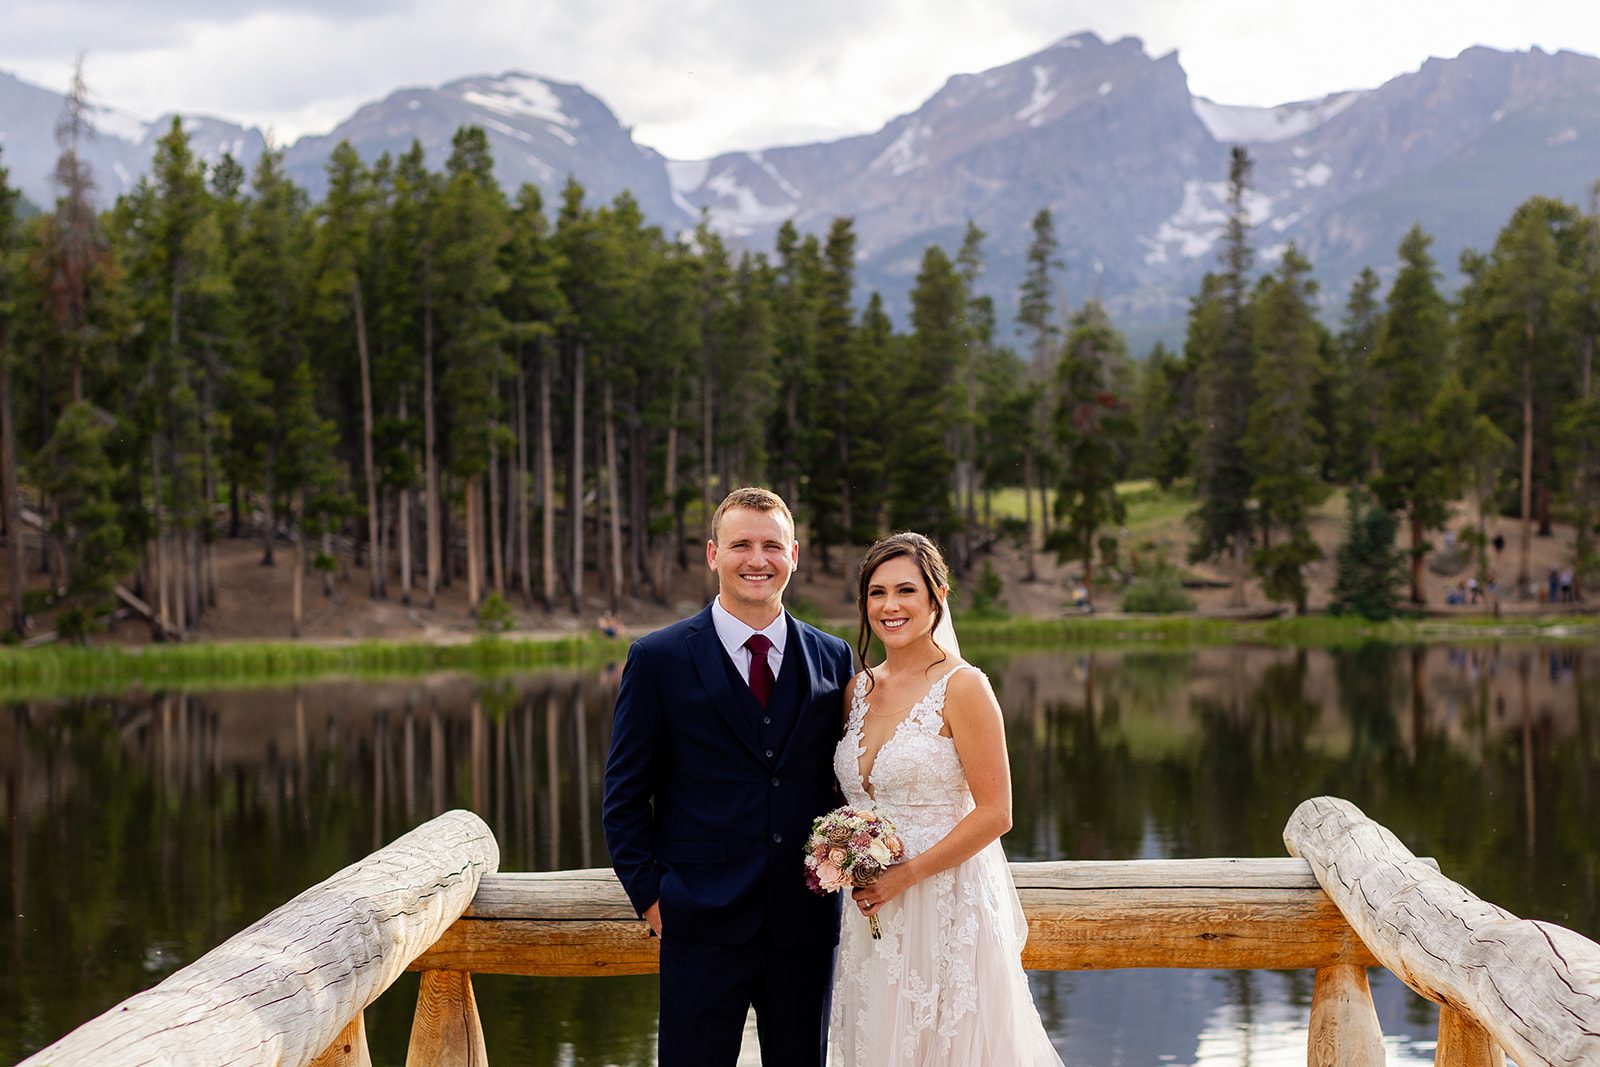 Bride and groom aft Sprague Lake after their elopement ceremony